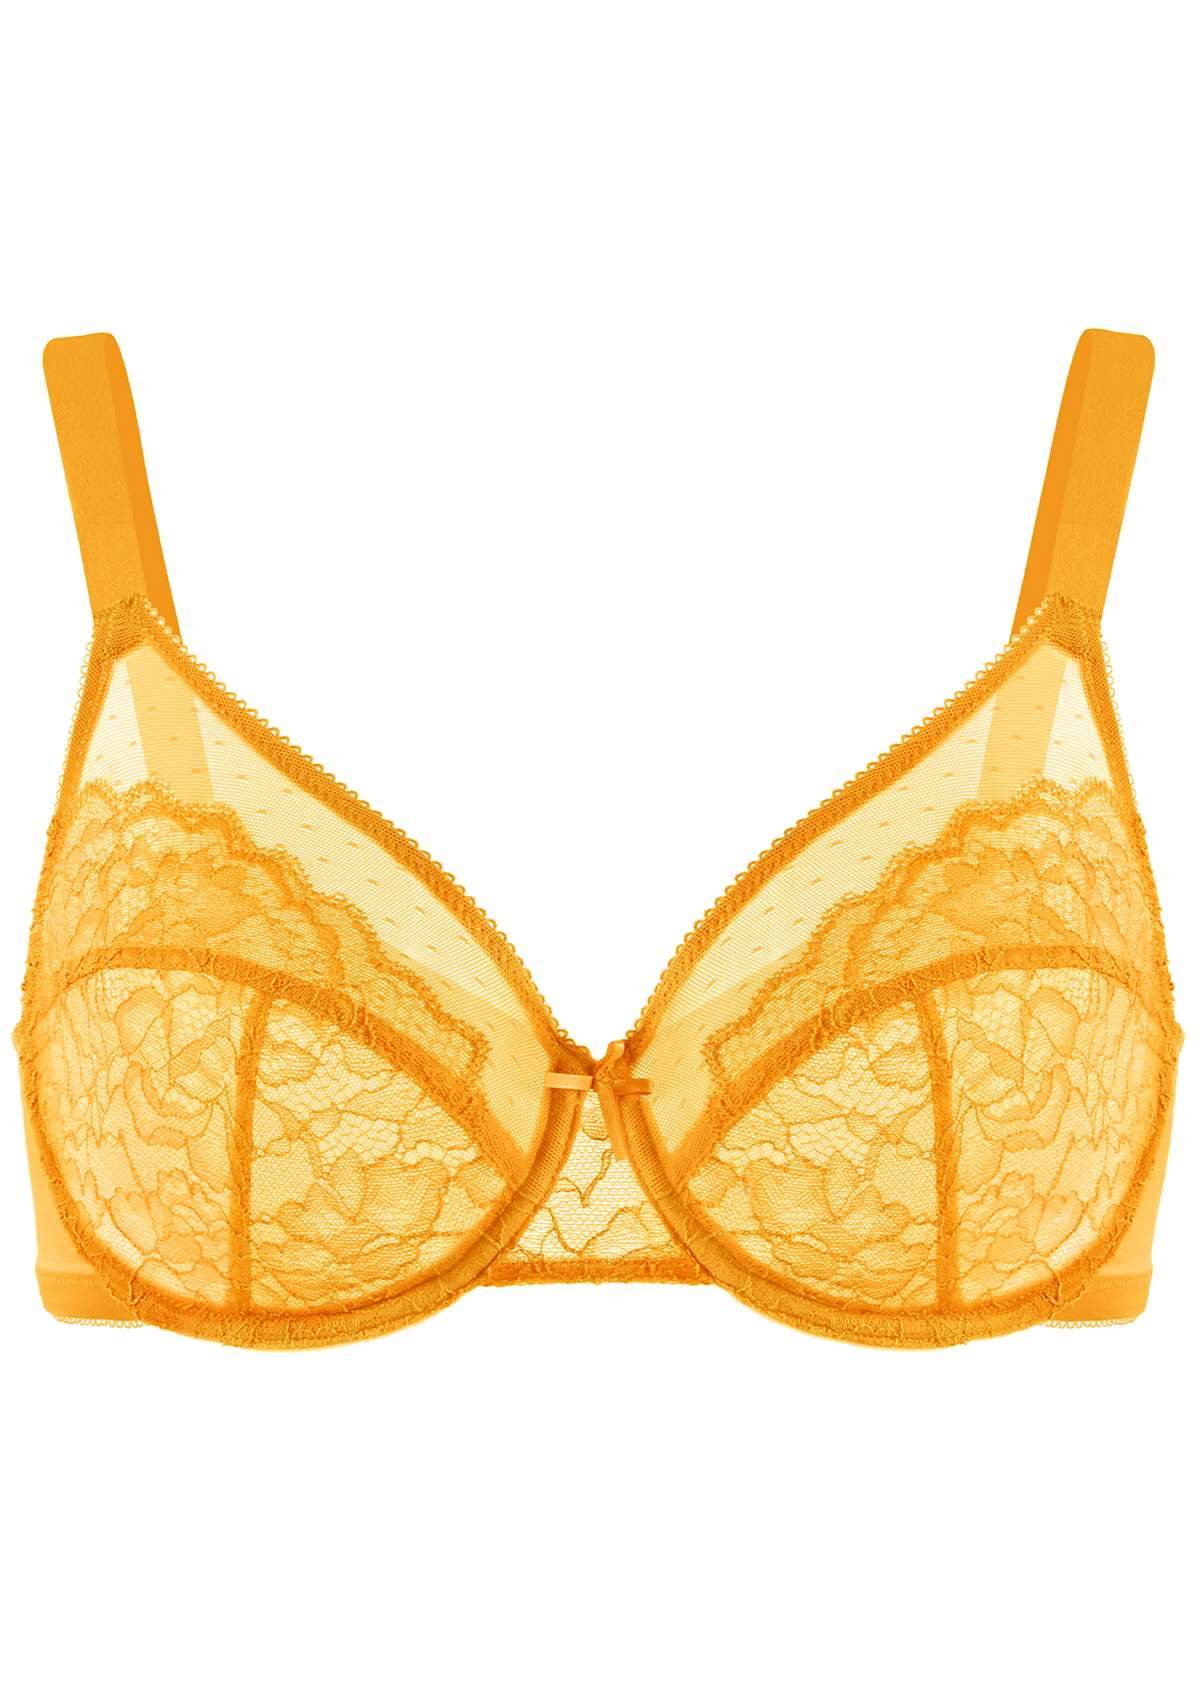 HSIA Enchante Bra And Panty Sets: Unpadded Bra With Back Support - Cadmium Yellow / 46 / D